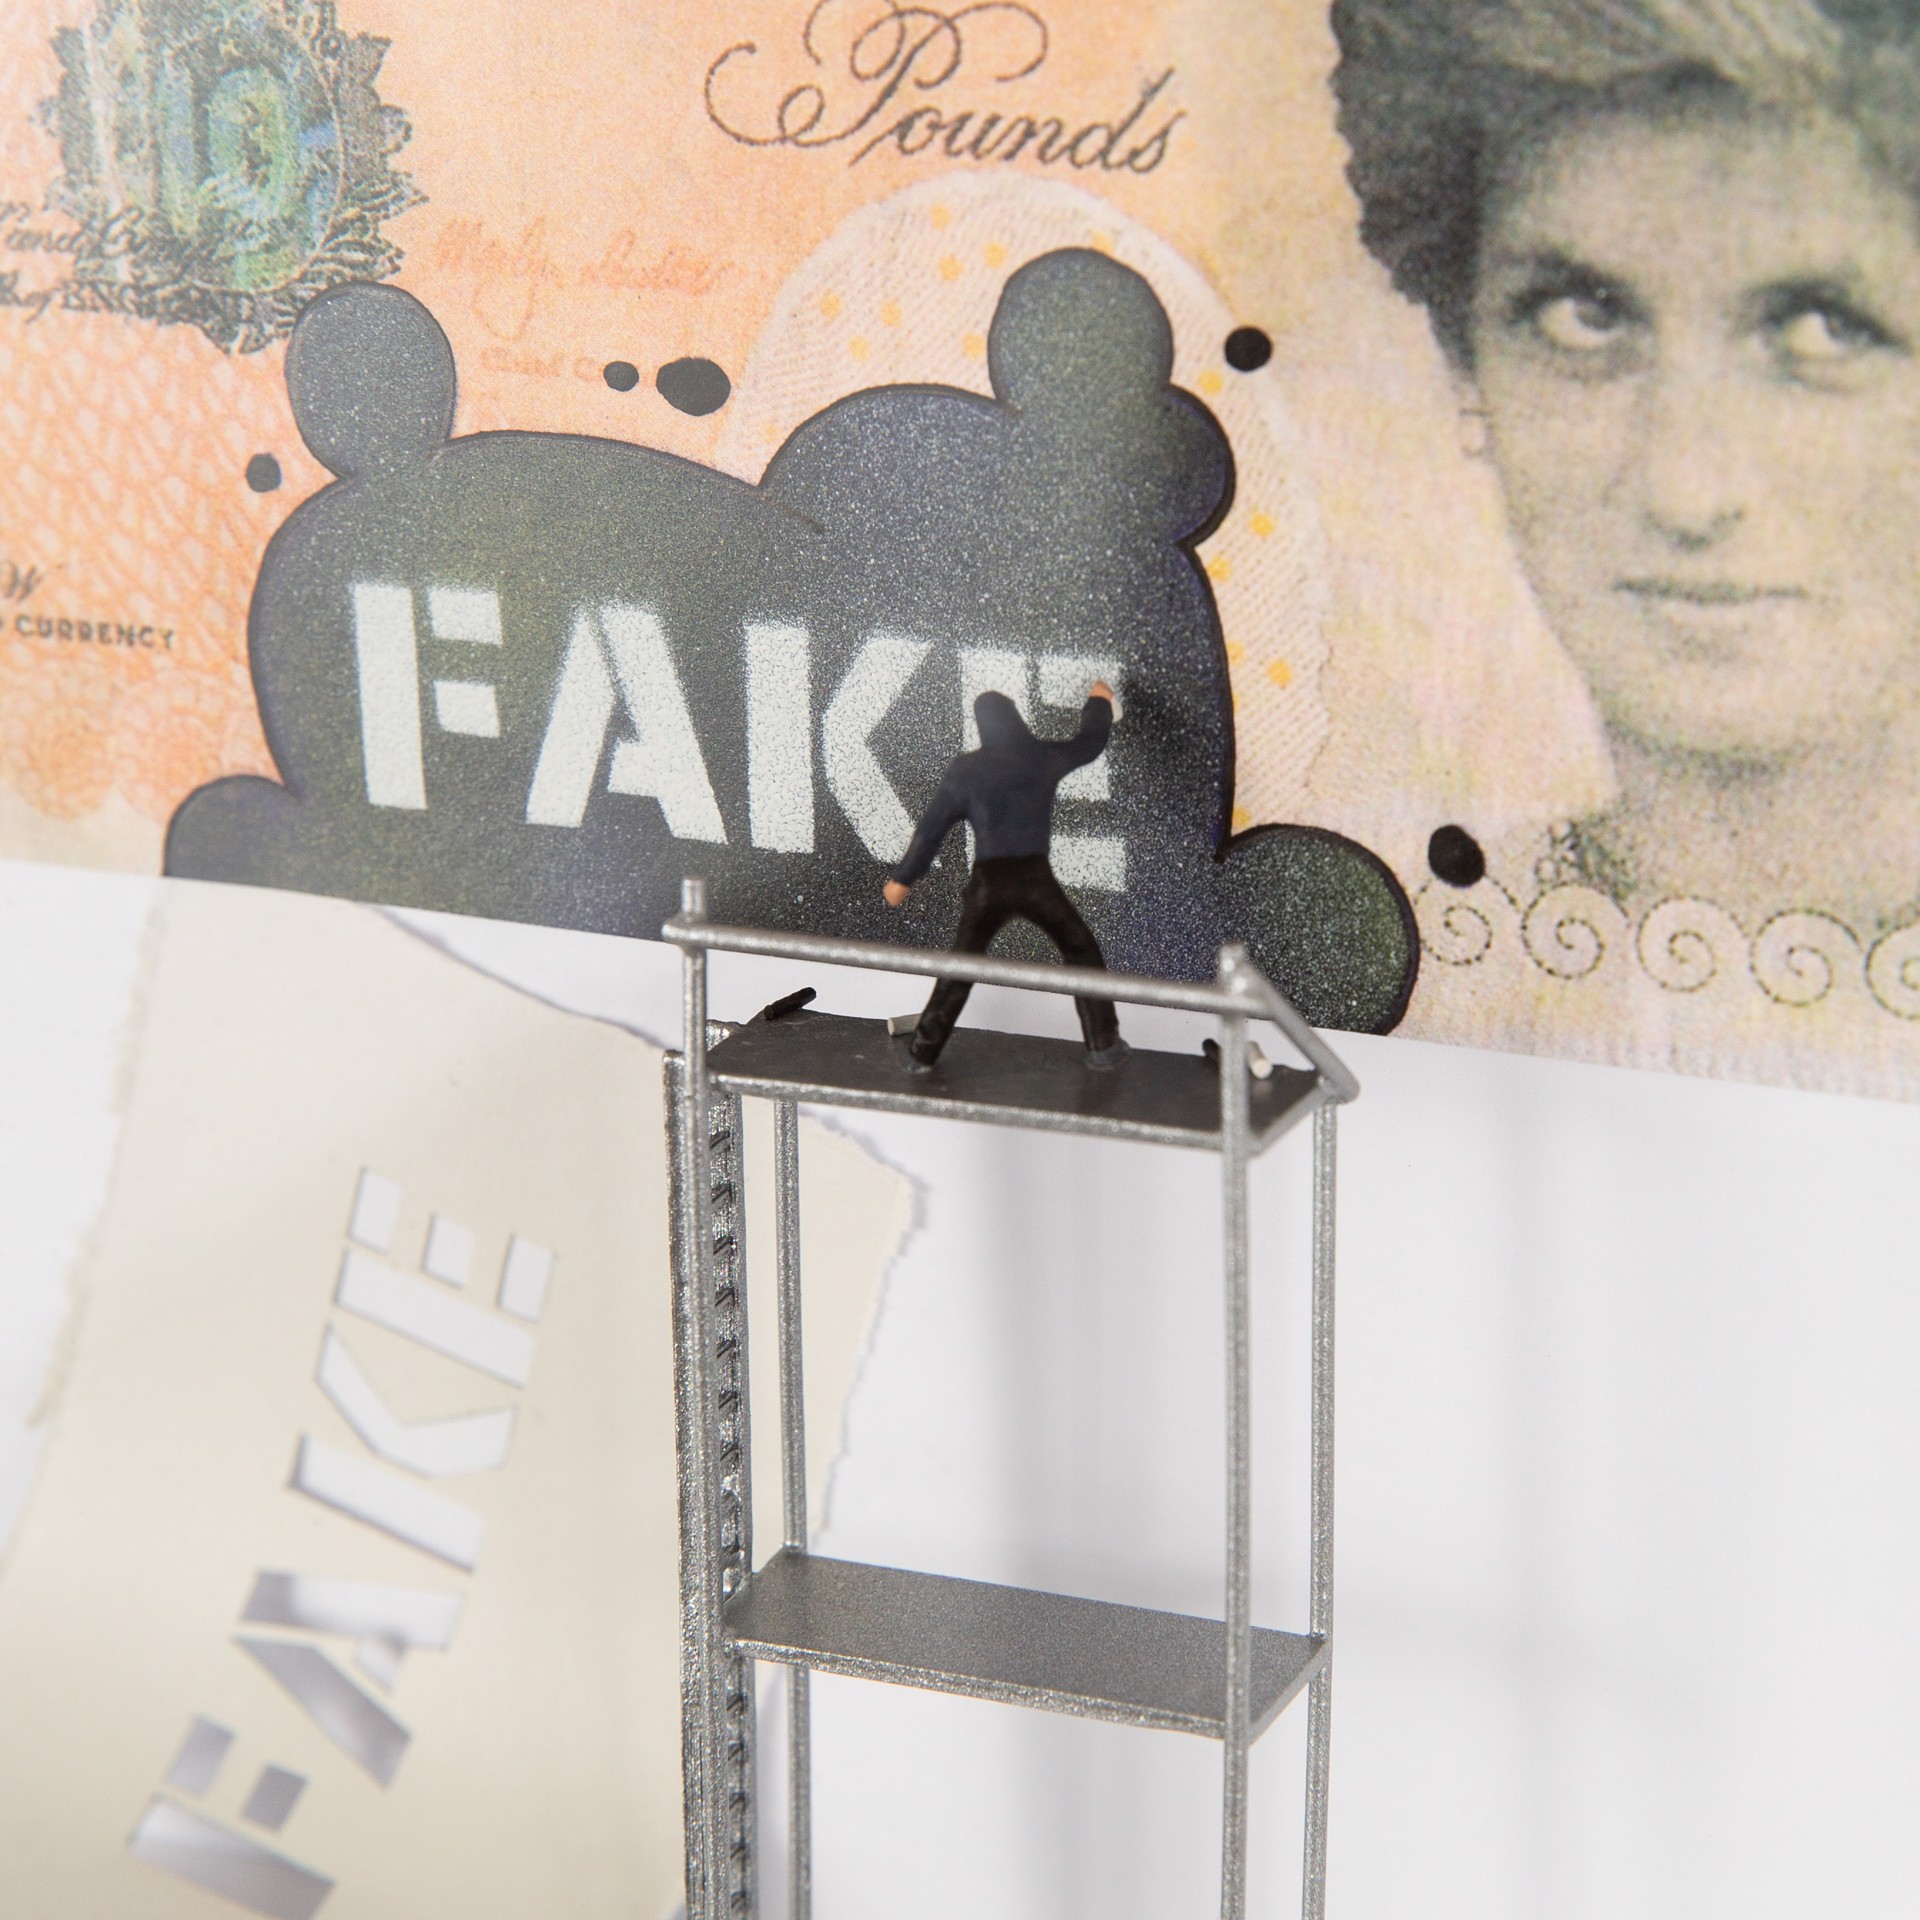 Di-Faked Tenner Multicolour, White Fake by Roy's People